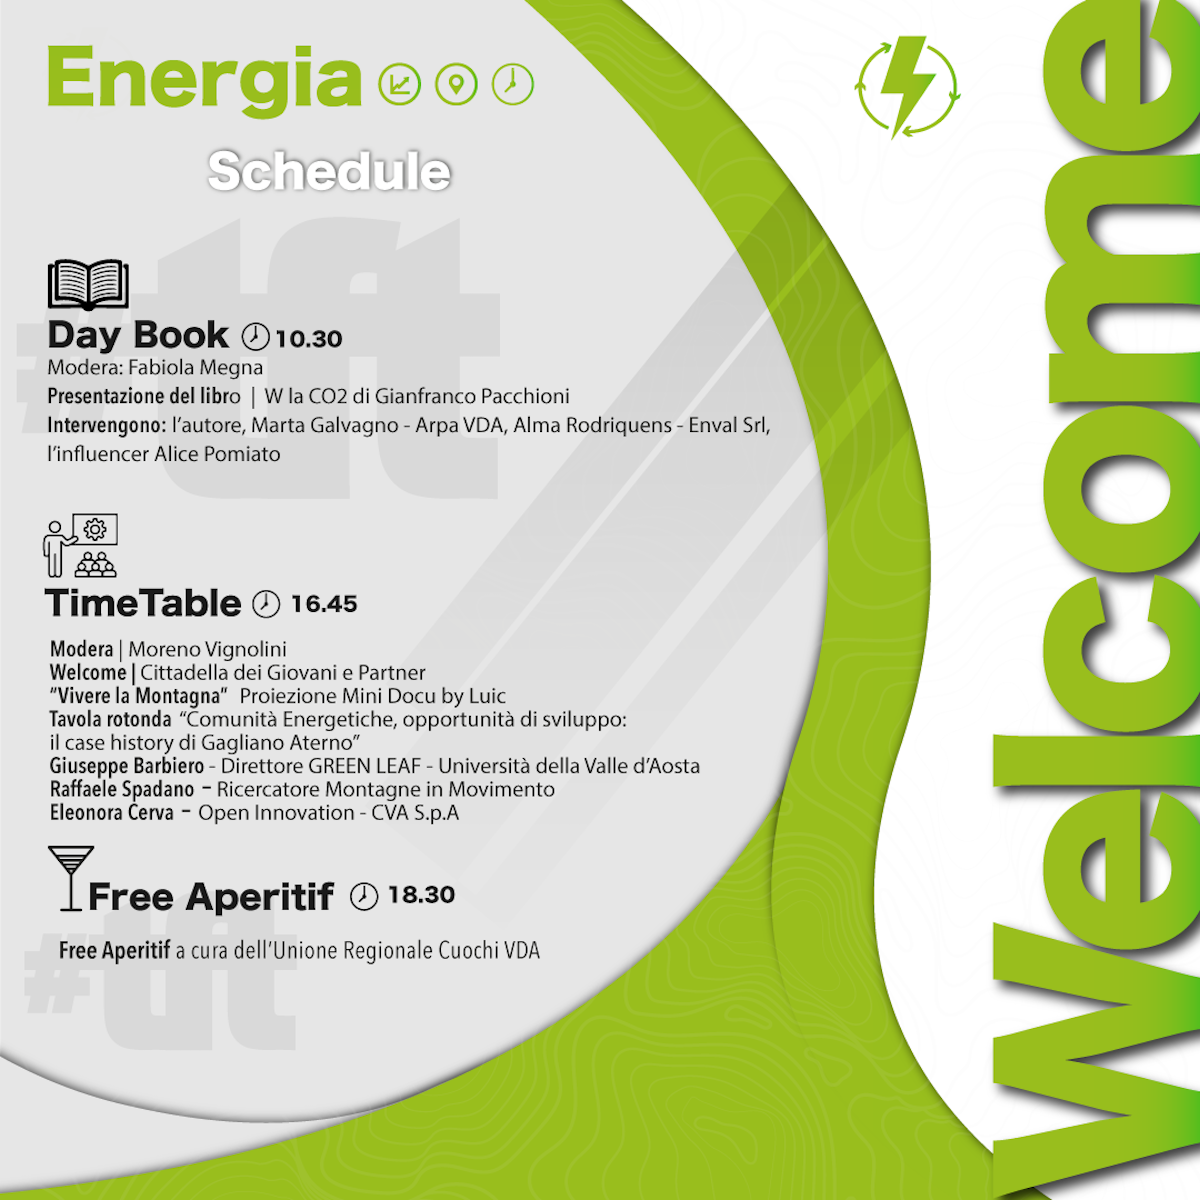 The First Thursday energia